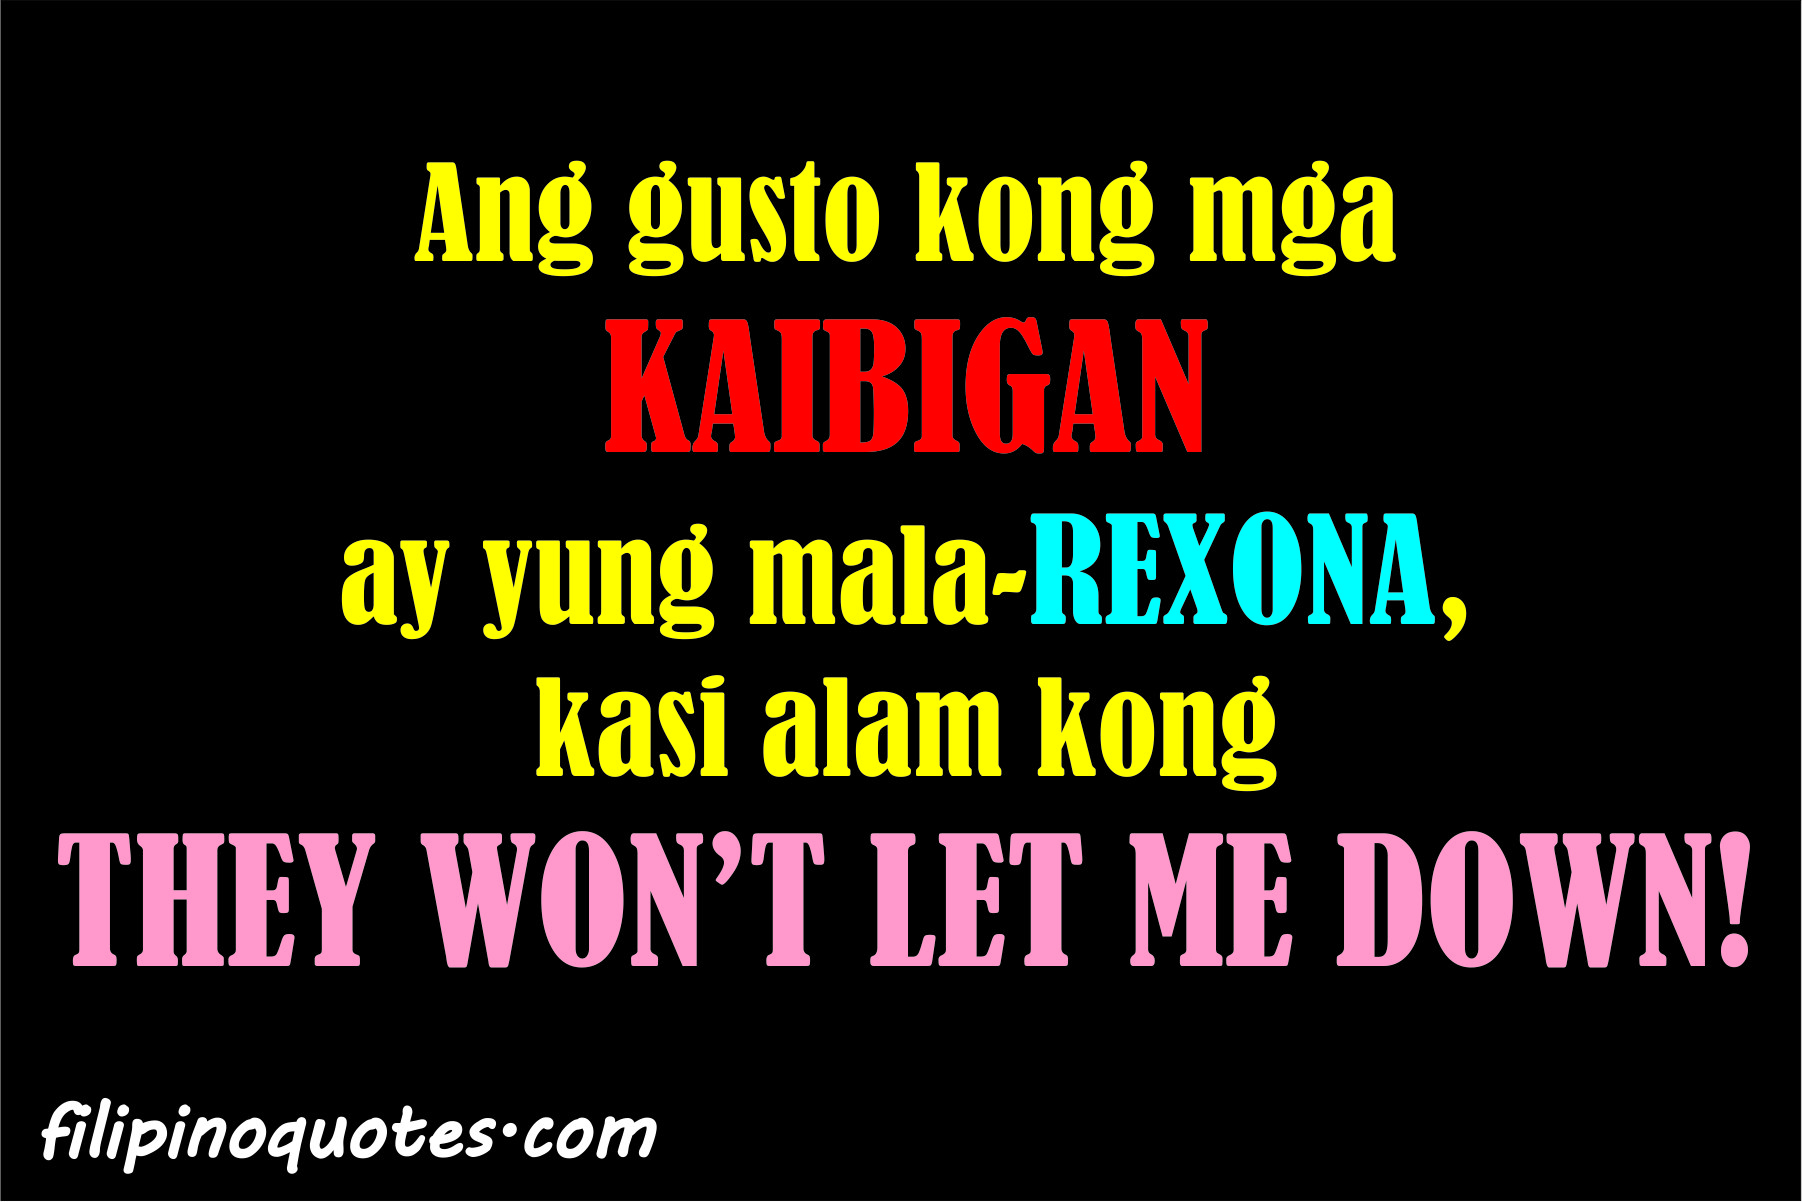 tagalog friendship love quotes